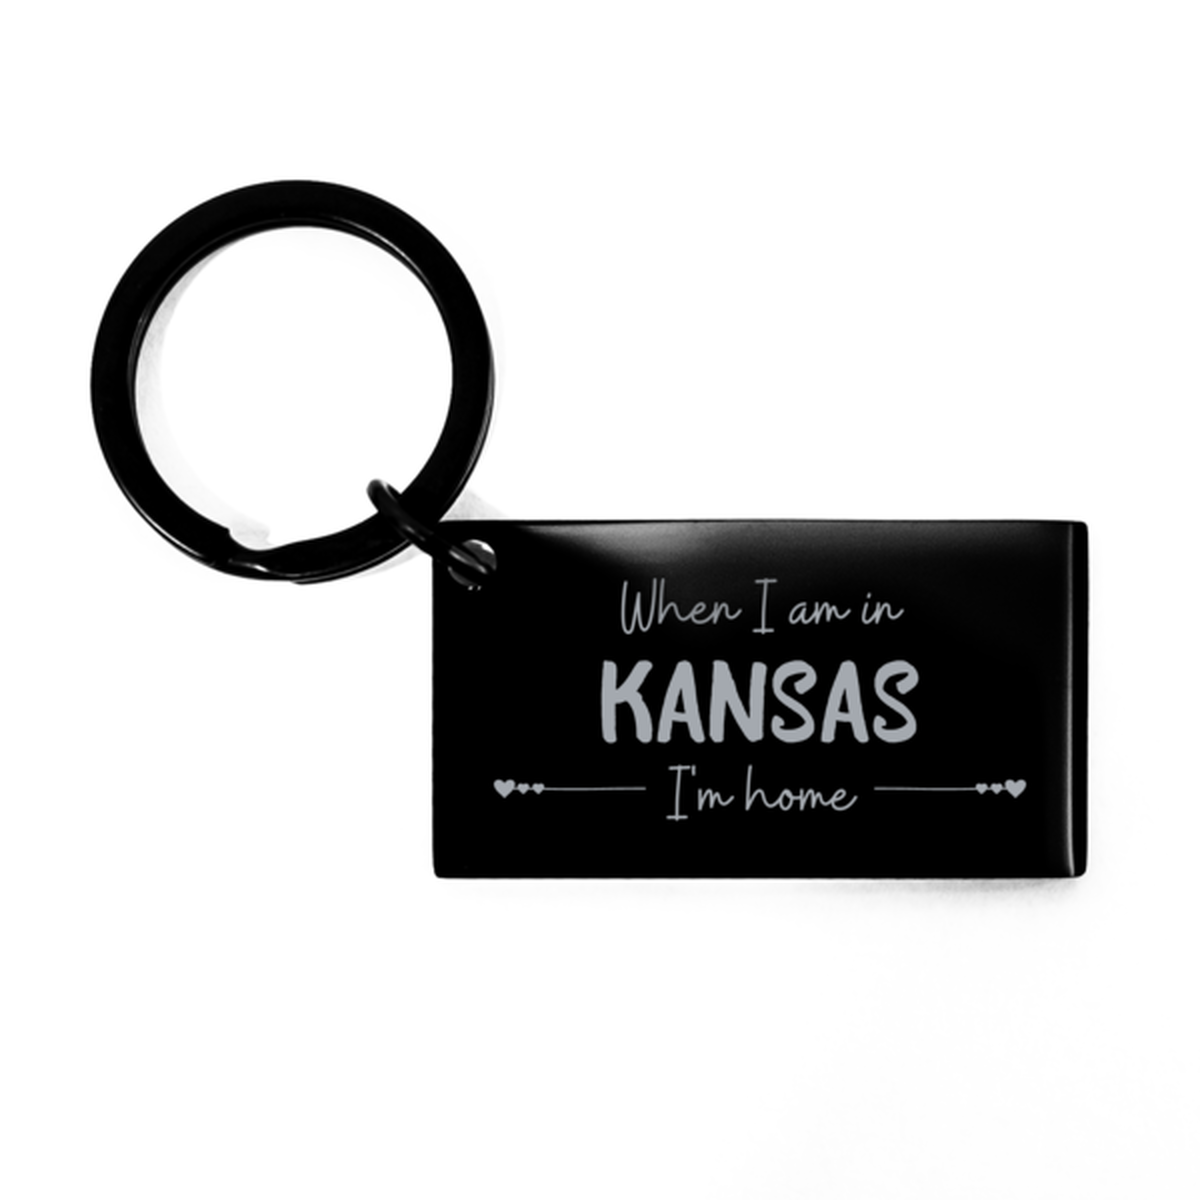 When I am in Kansas I'm home Keychain, Cheap Gifts For Kansas, State Kansas Birthday Gifts for Friends Coworker